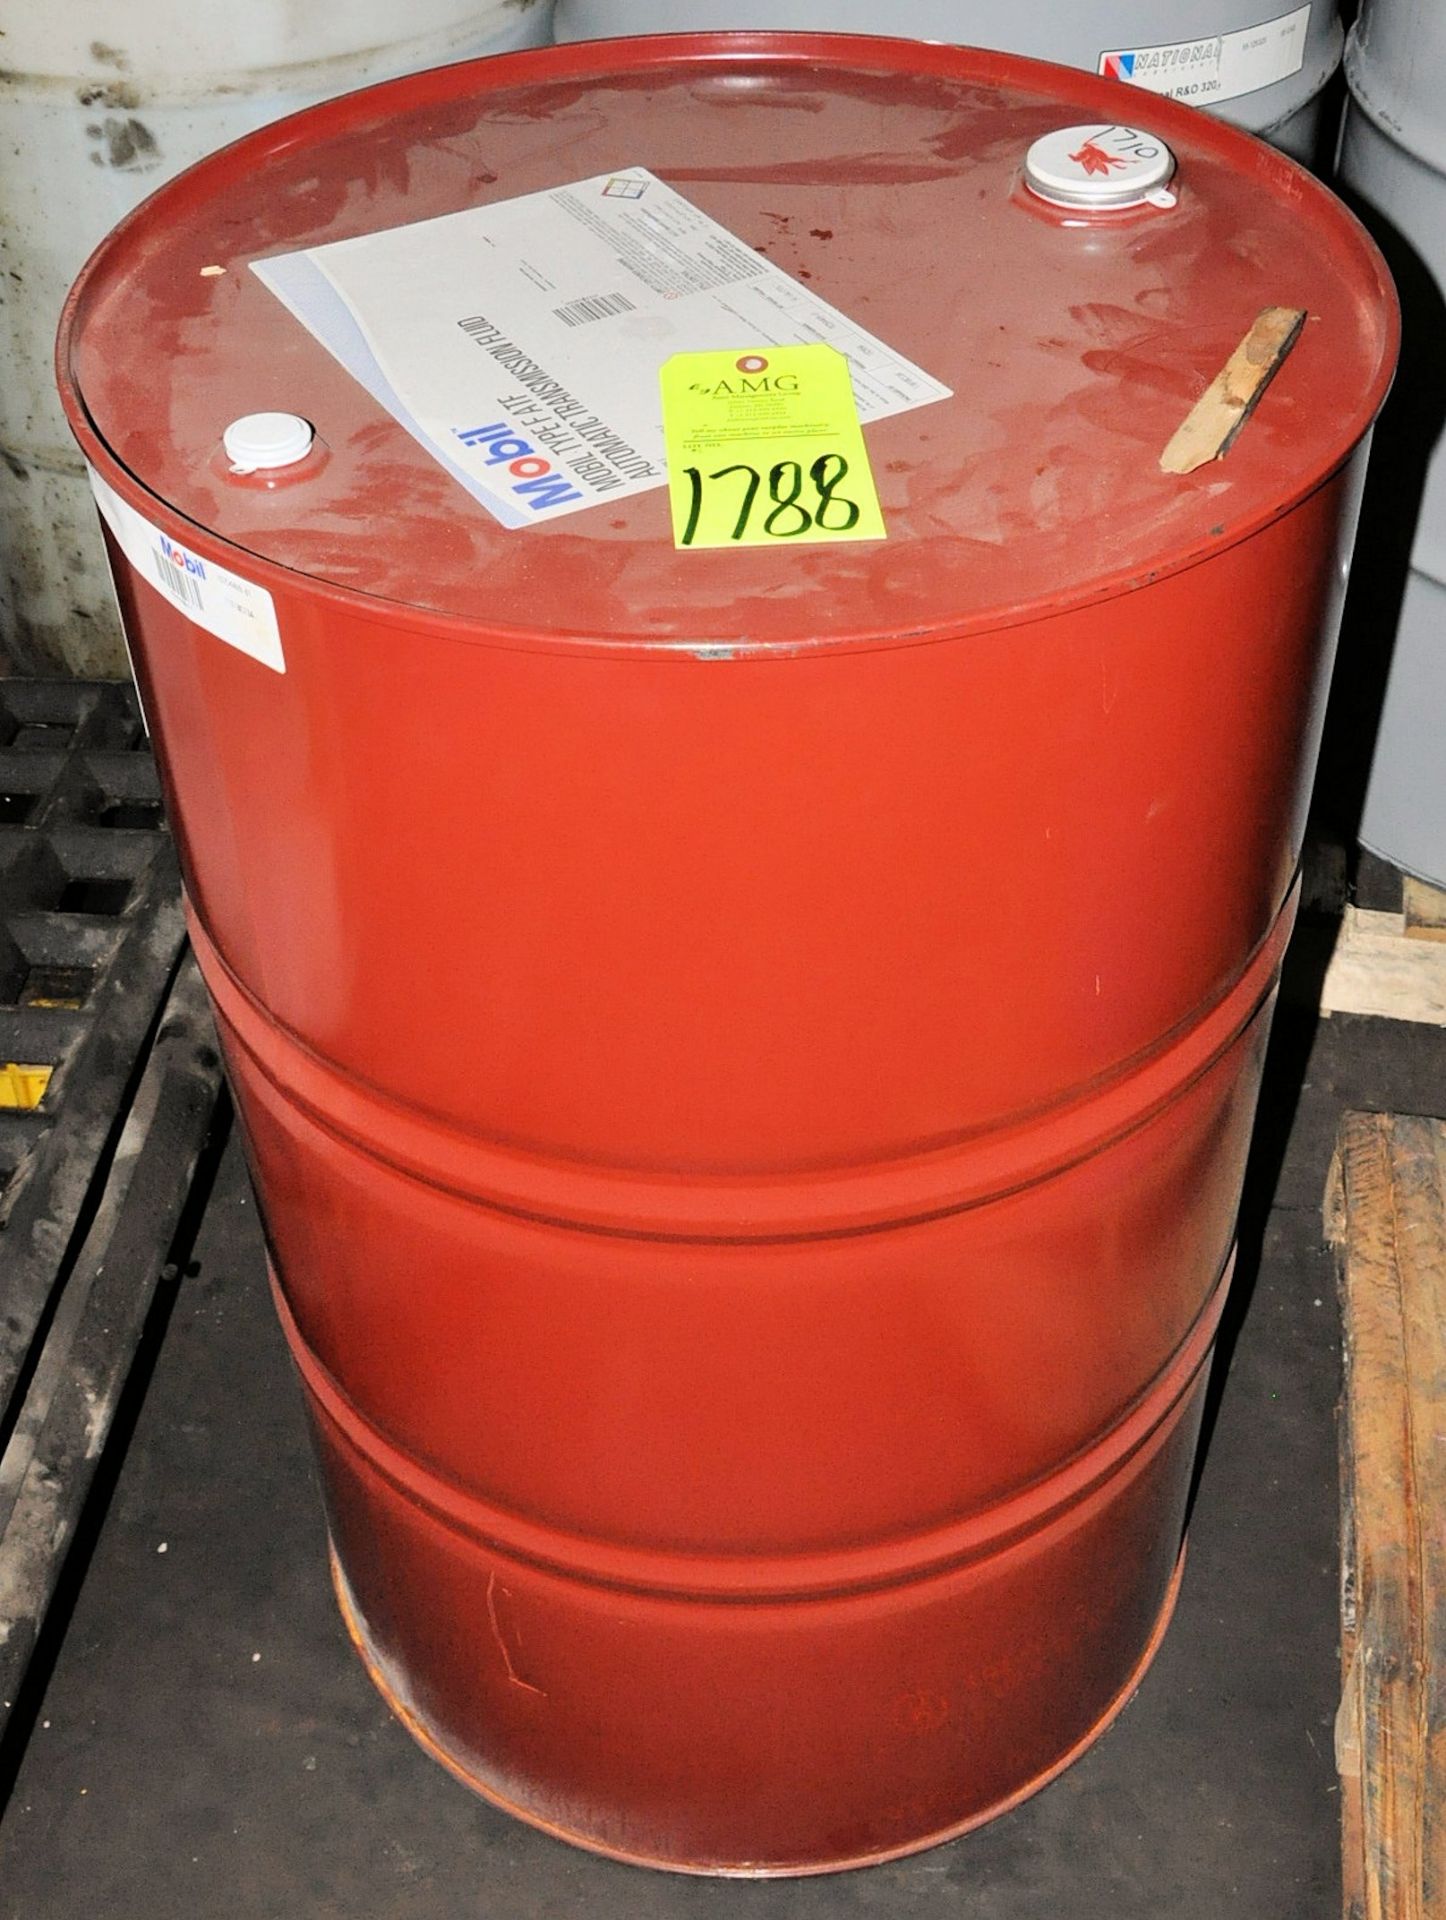 55-Gallon Drum Mobil Type F Automatic Transmission Fluid, (Oils Storage Building), (Yellow Tag)